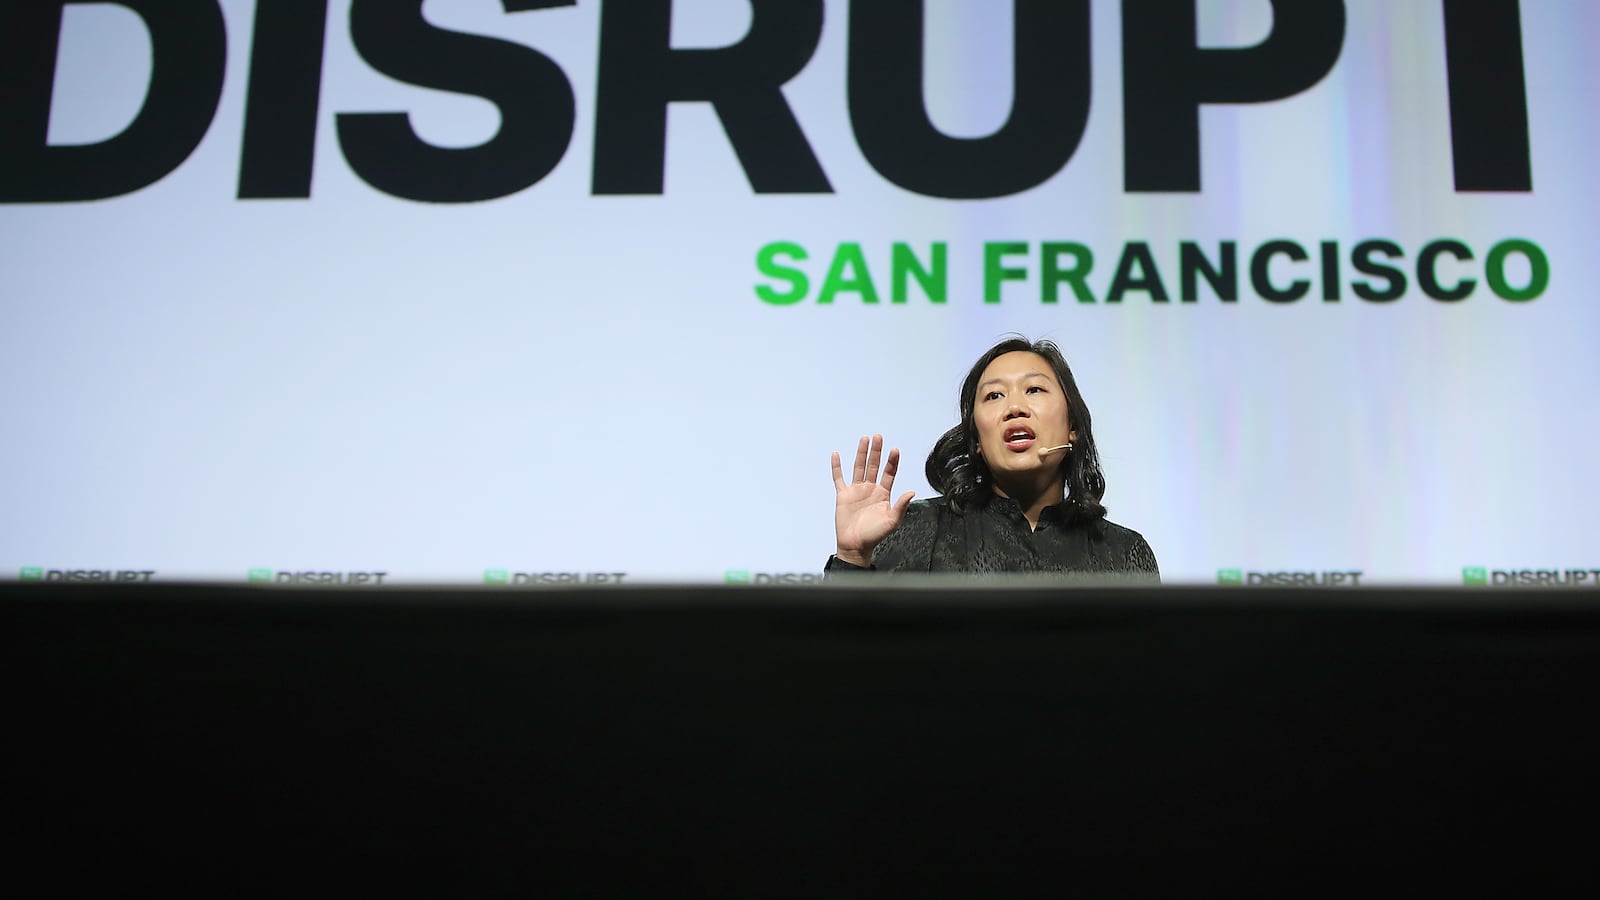 Priscilla Chan, co-founder of the Chan Zuckerberg Initiative LLC, speaks during the TechCrunch Disrupt SF 2018  on September 6, 2018 in San Francisco, California.  (Photo by Justin Sullivan/Getty Images)